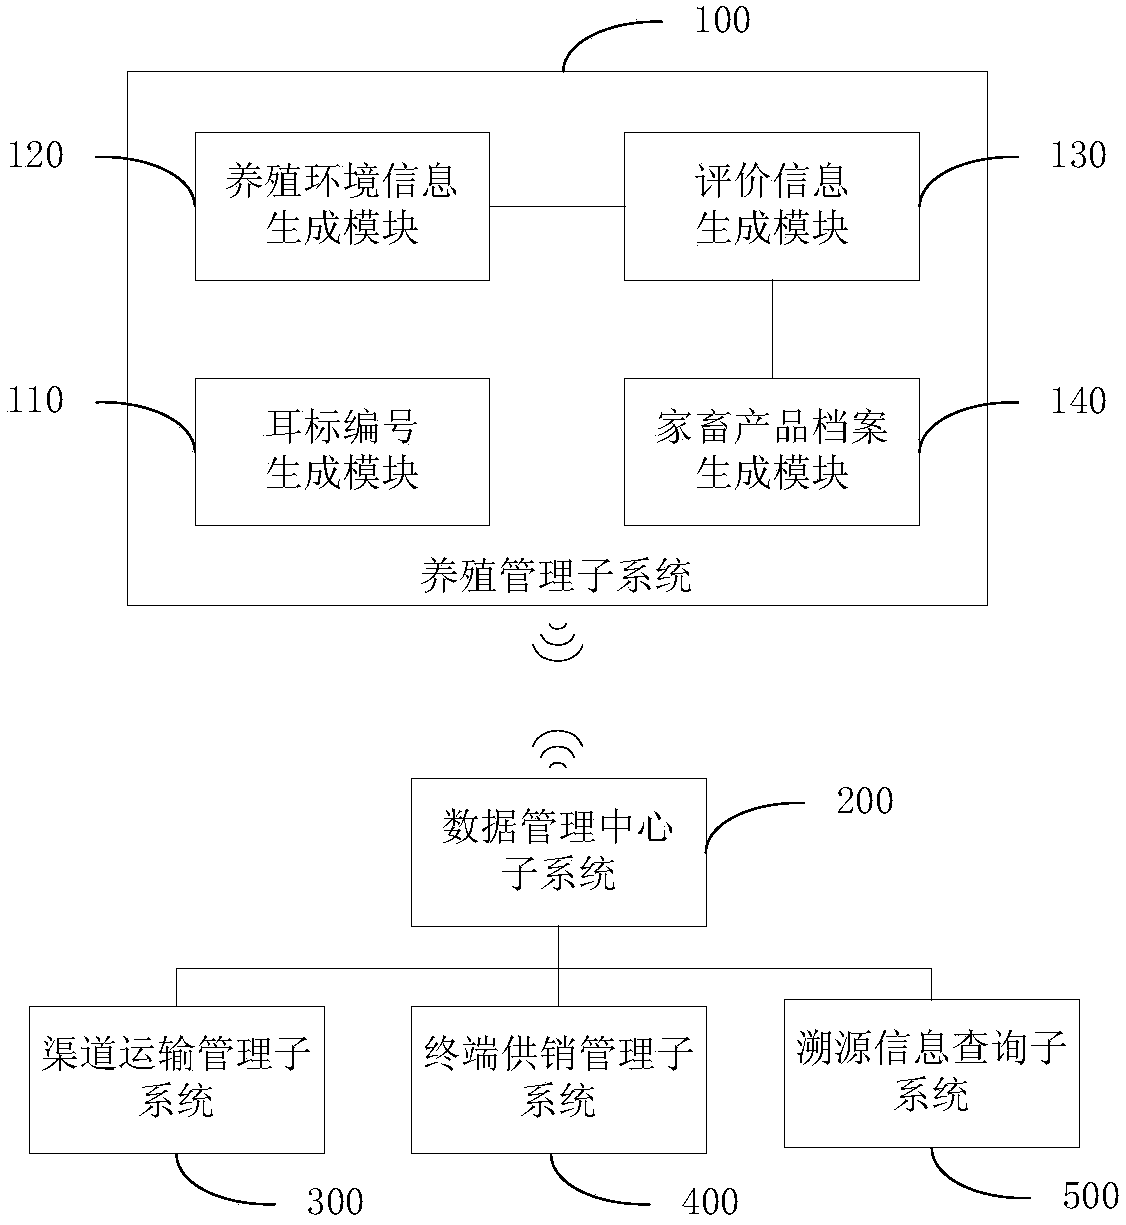 Livestock product monitoring and tracing method and system